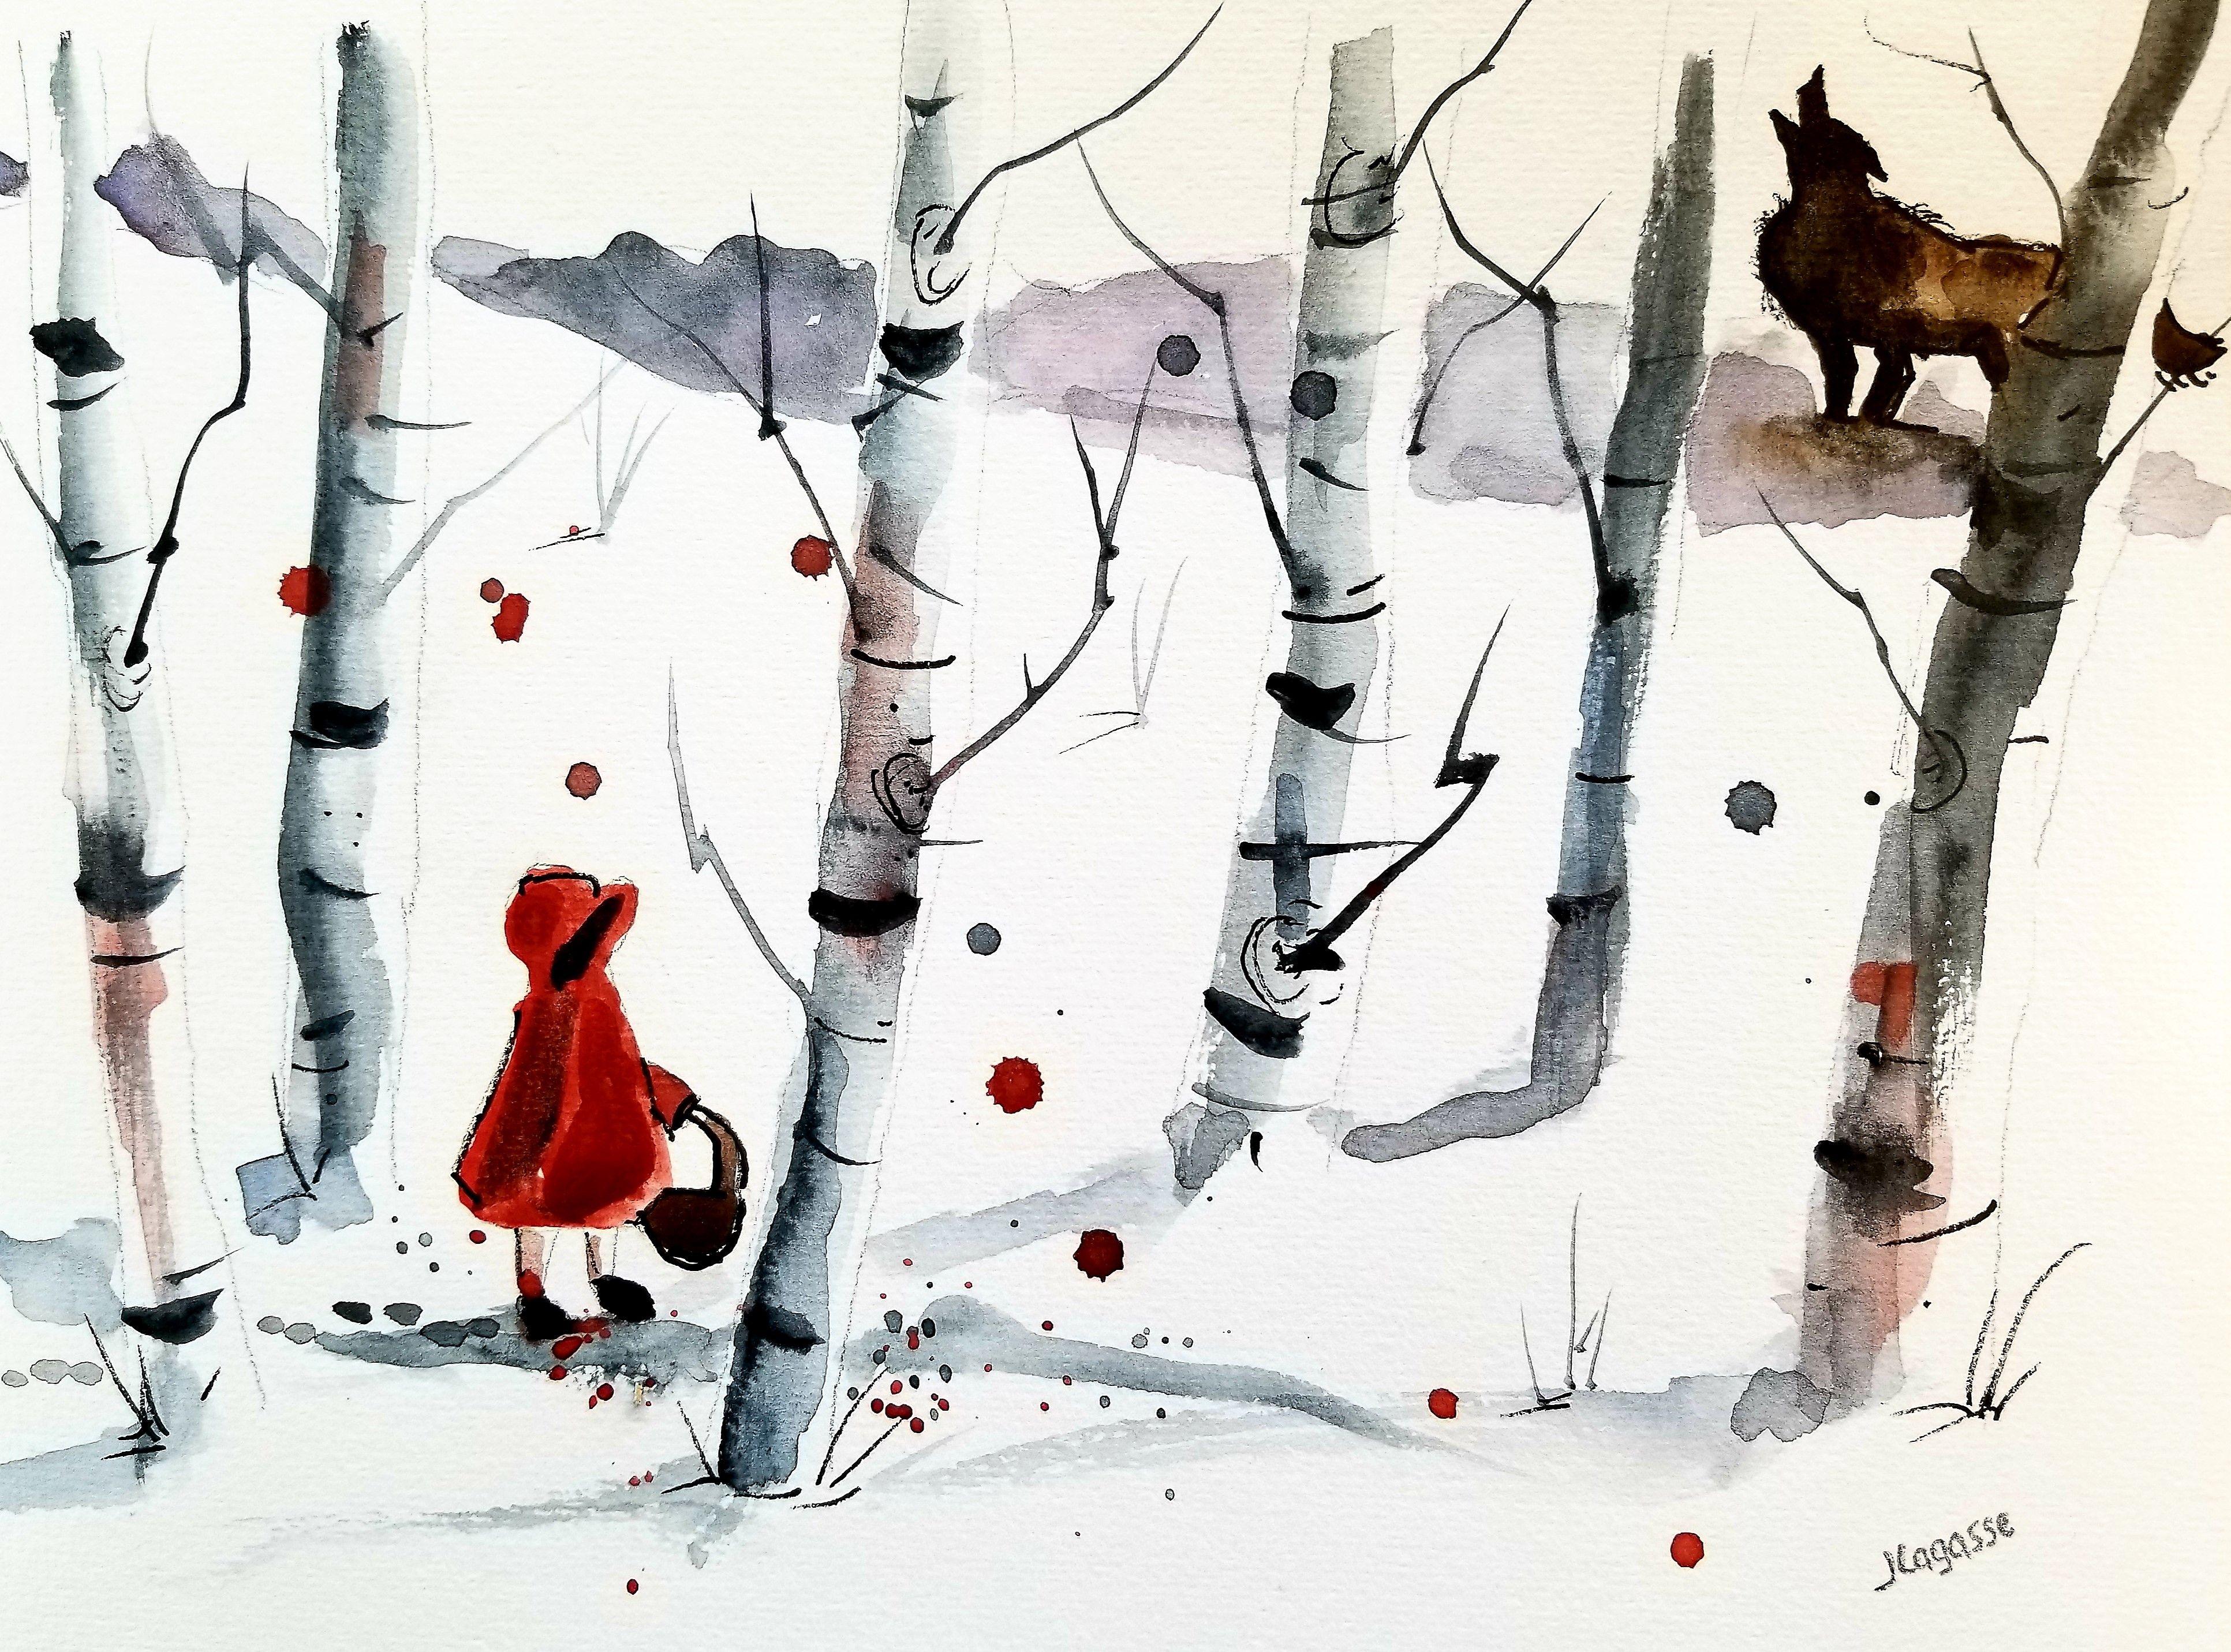 Big Bad Wolf, Painting, Watercolor on Watercolor Paper - Art by Jim Lagasse